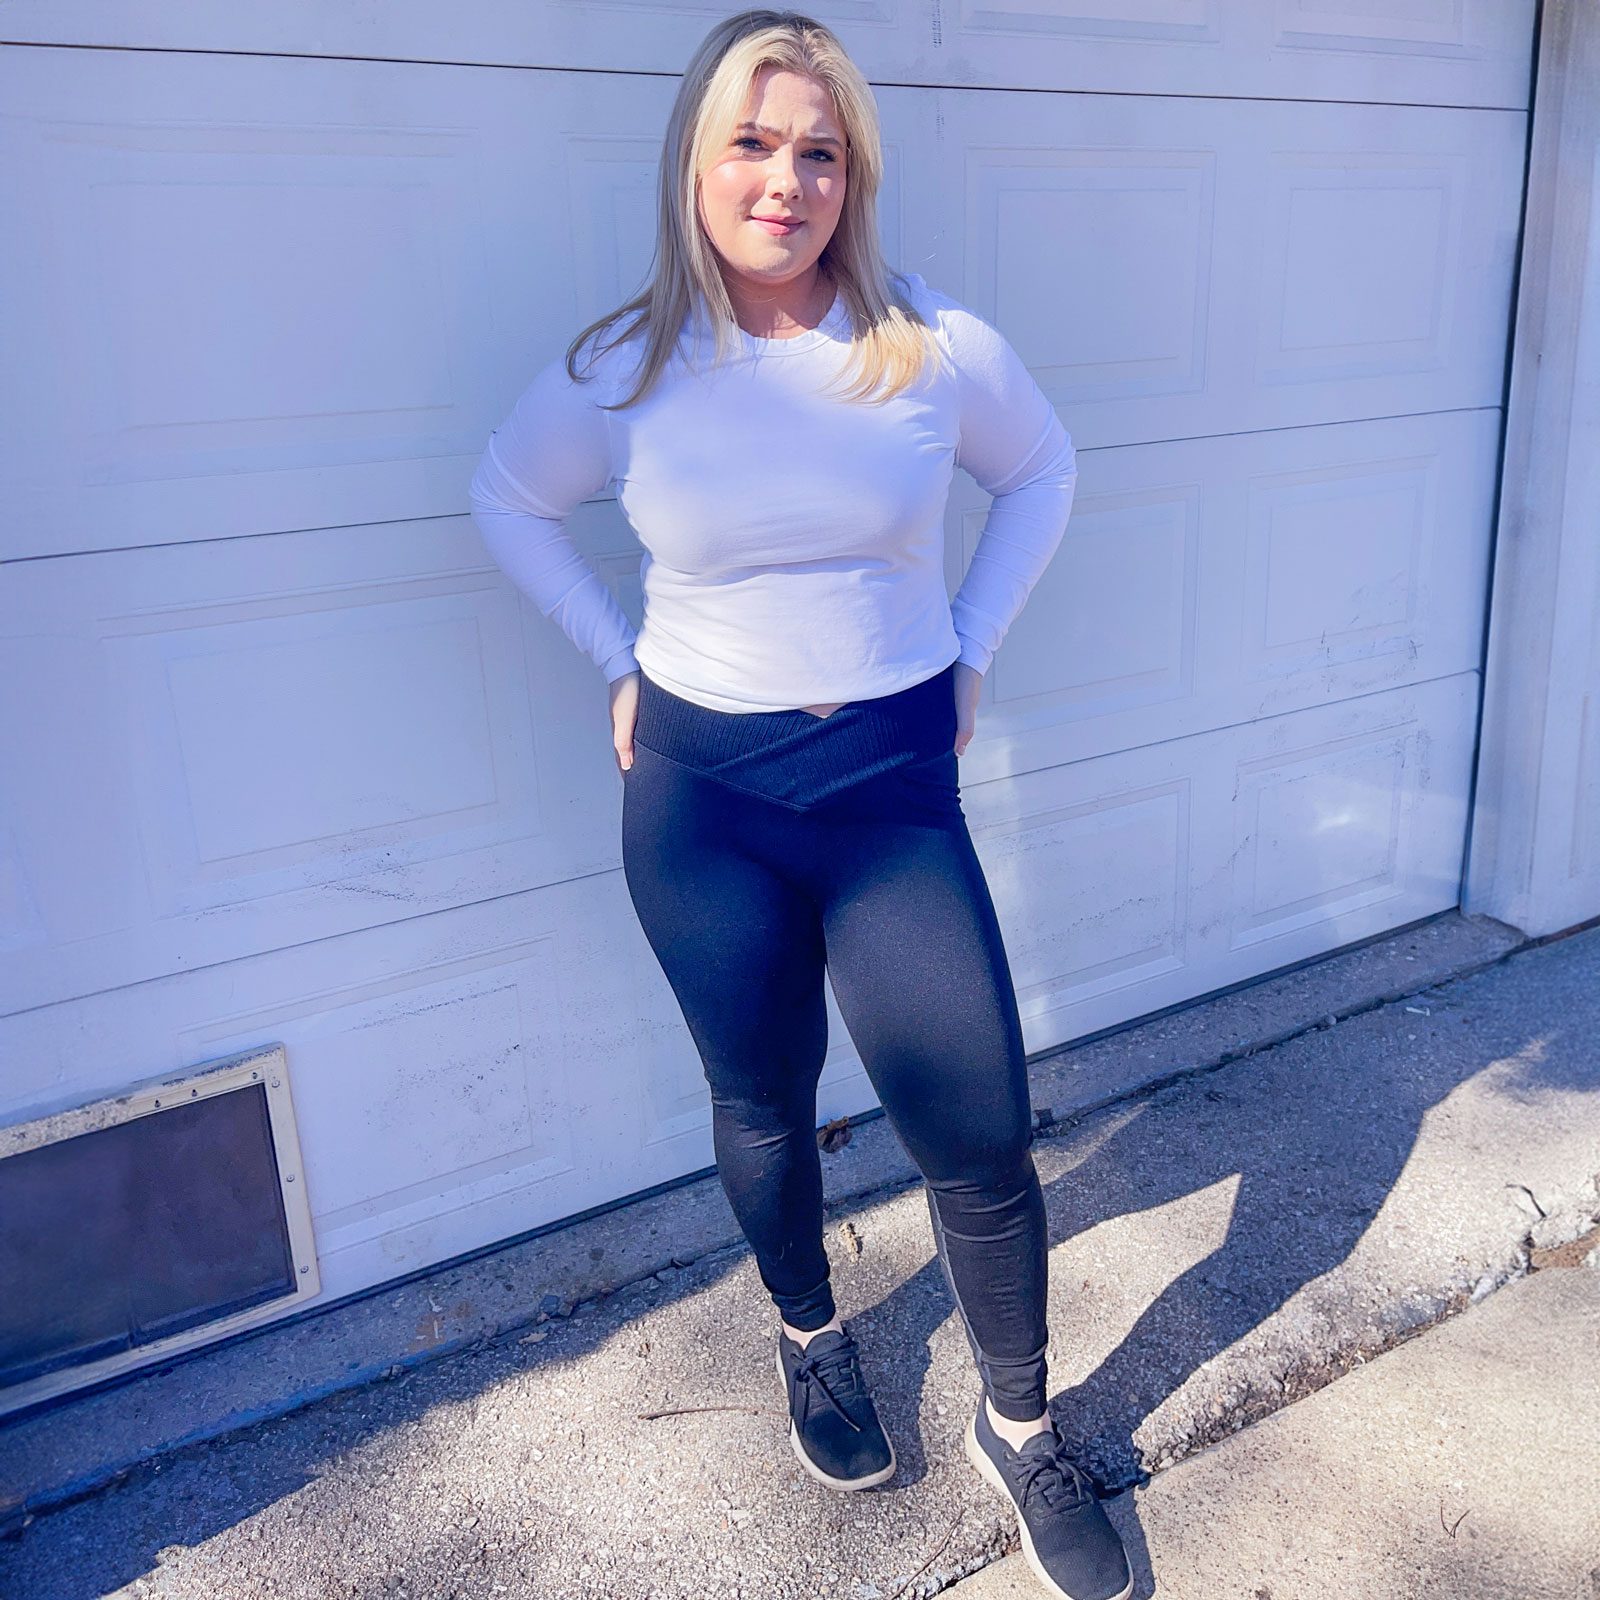 BABES on Instagram: Size Guide ~ The Black Yoga Tummy Control Legging